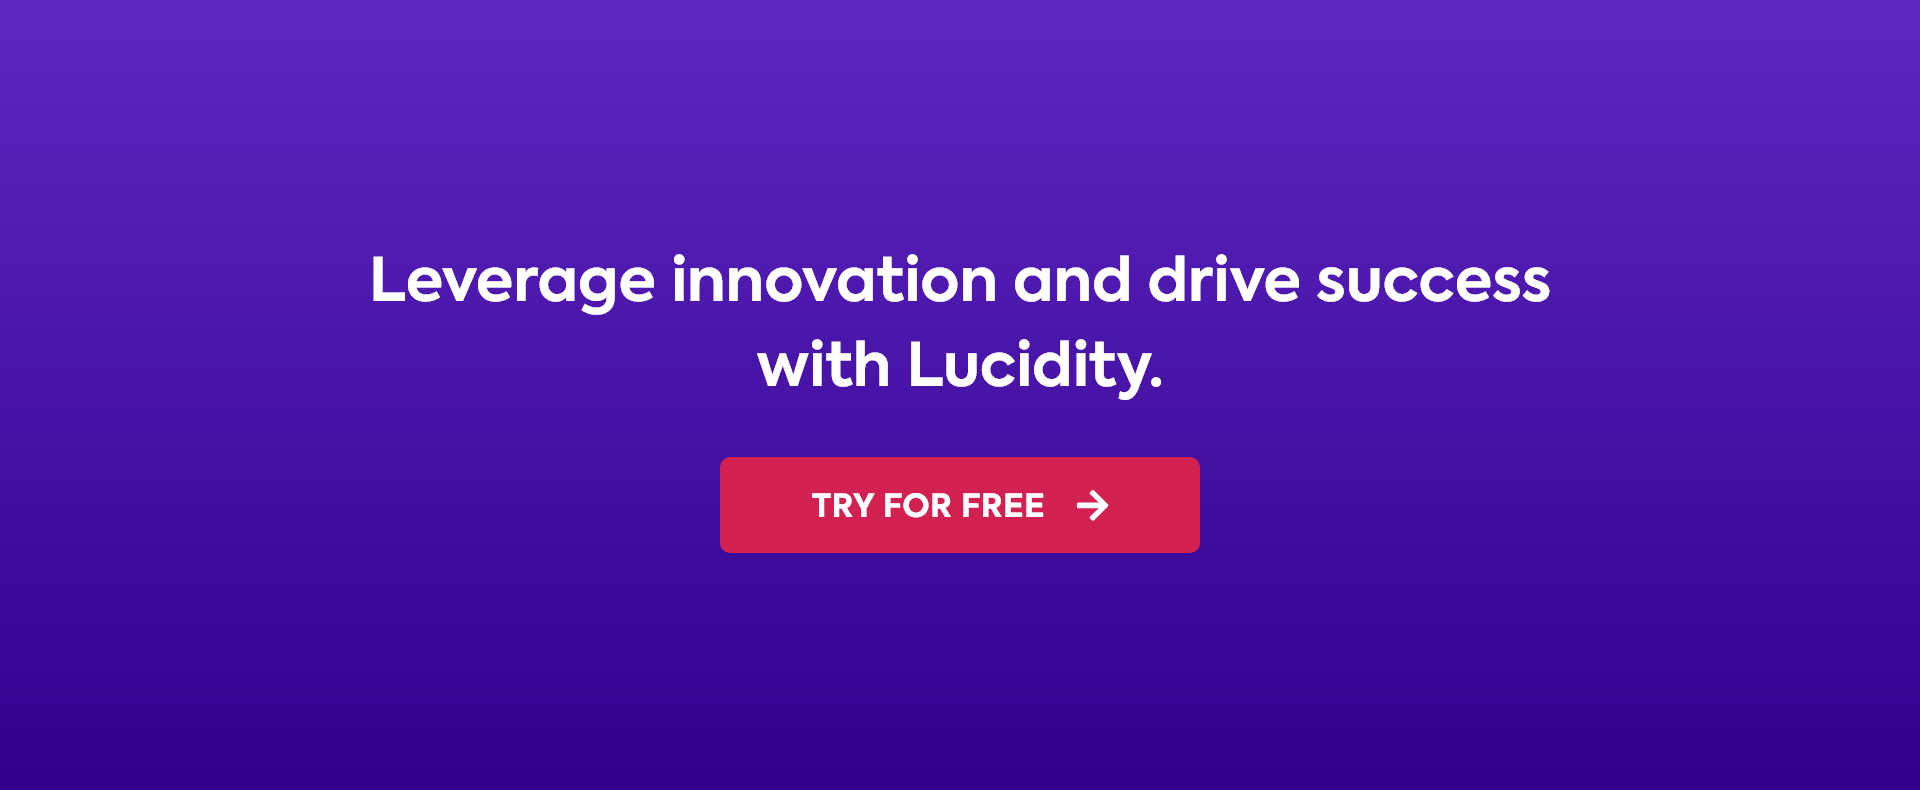 Leverage innovation and drive success with Lucidity